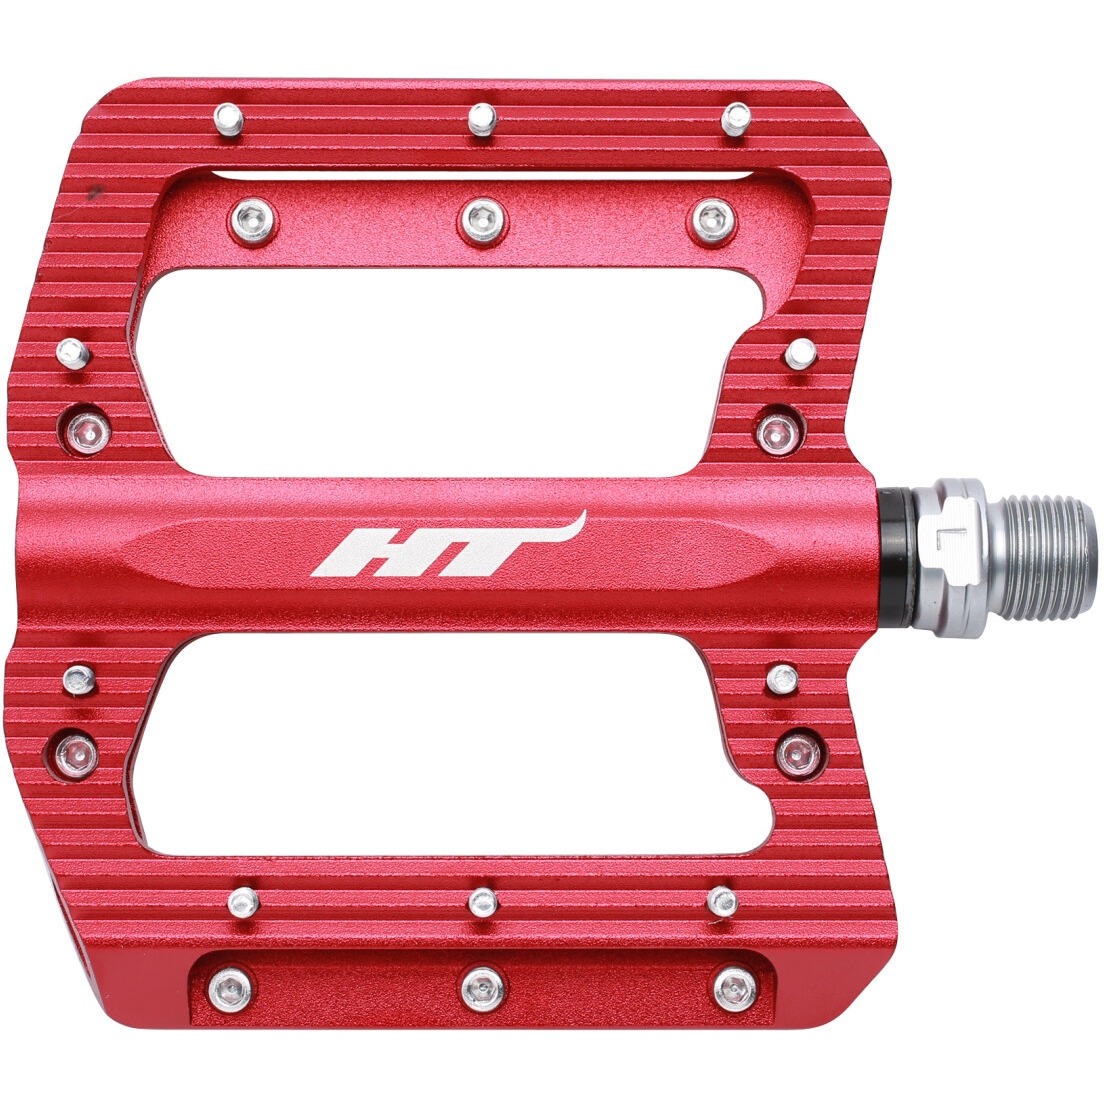 Picture of HT ANS01 NANO Flat Pedal - red